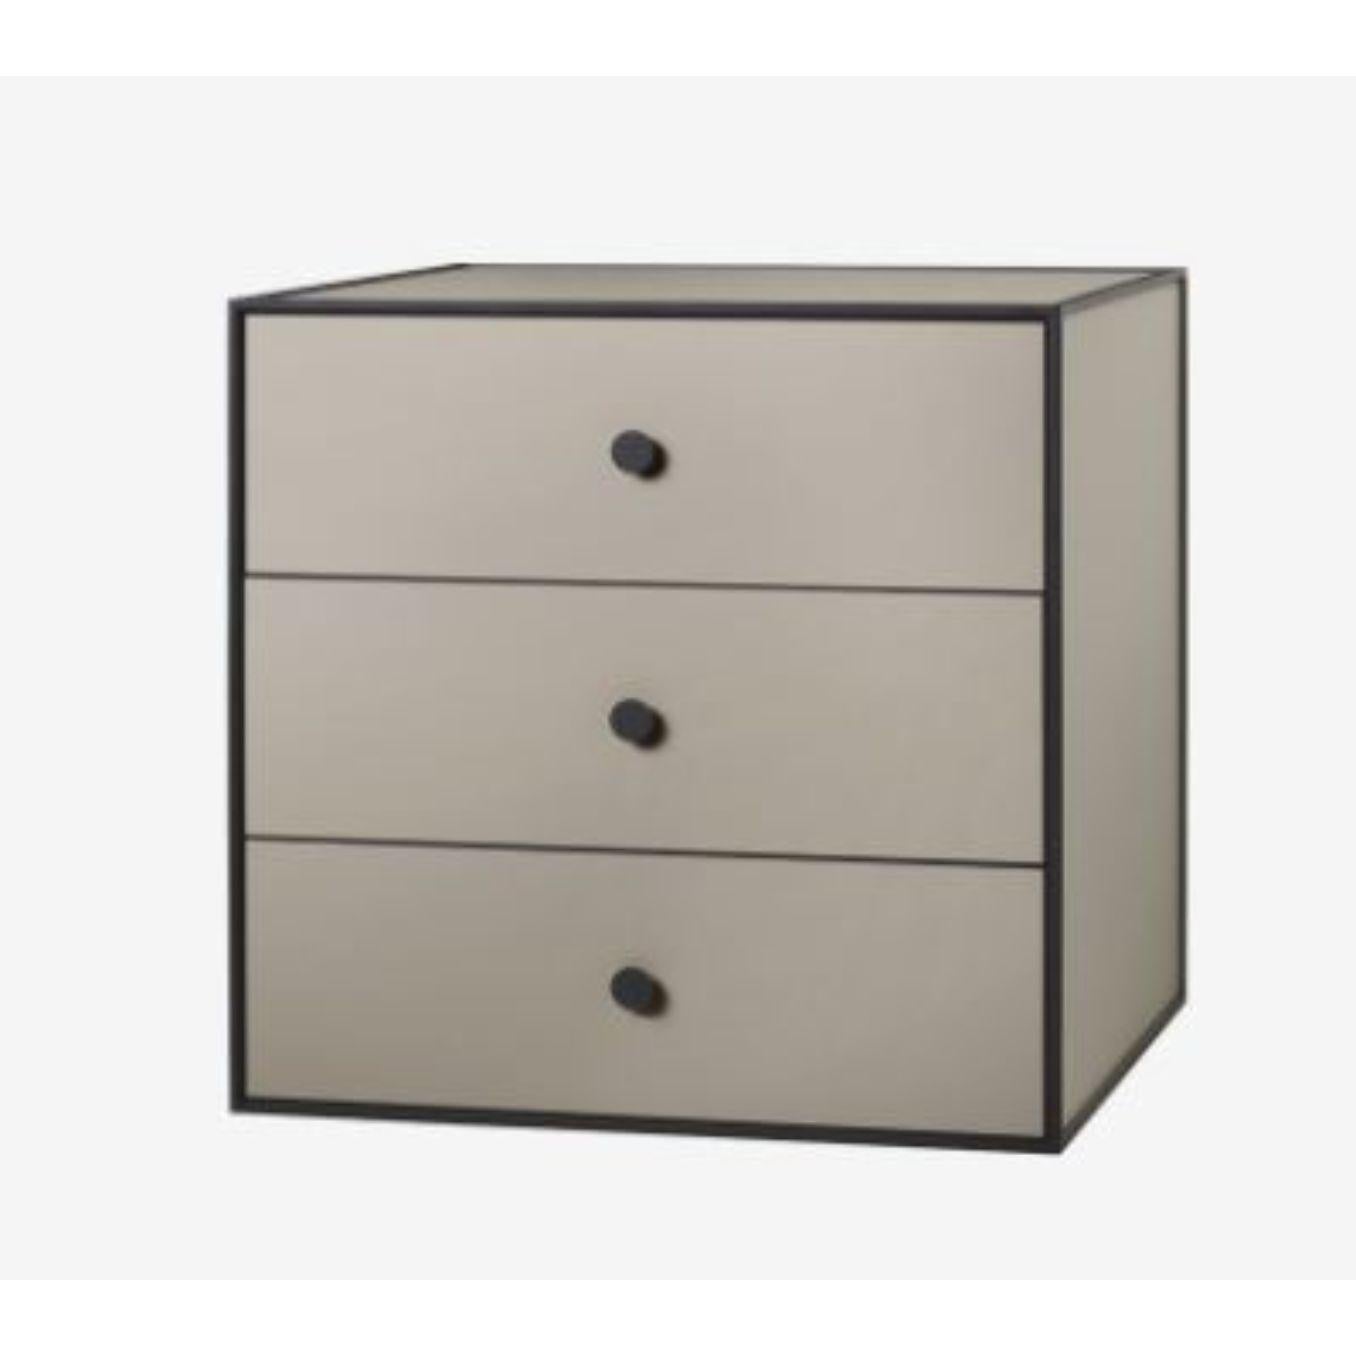 49 sand frame box with 3 drawer by Lassen.
Dimensions: D 49 x W 42 x H 49 cm. 
Materials: Finér, Melamin, Melamin, Melamine, Metal, Veneer.
Also available in different colors and dimensions. 
Weight: 24 Kg.


By Lassen is a Danish design